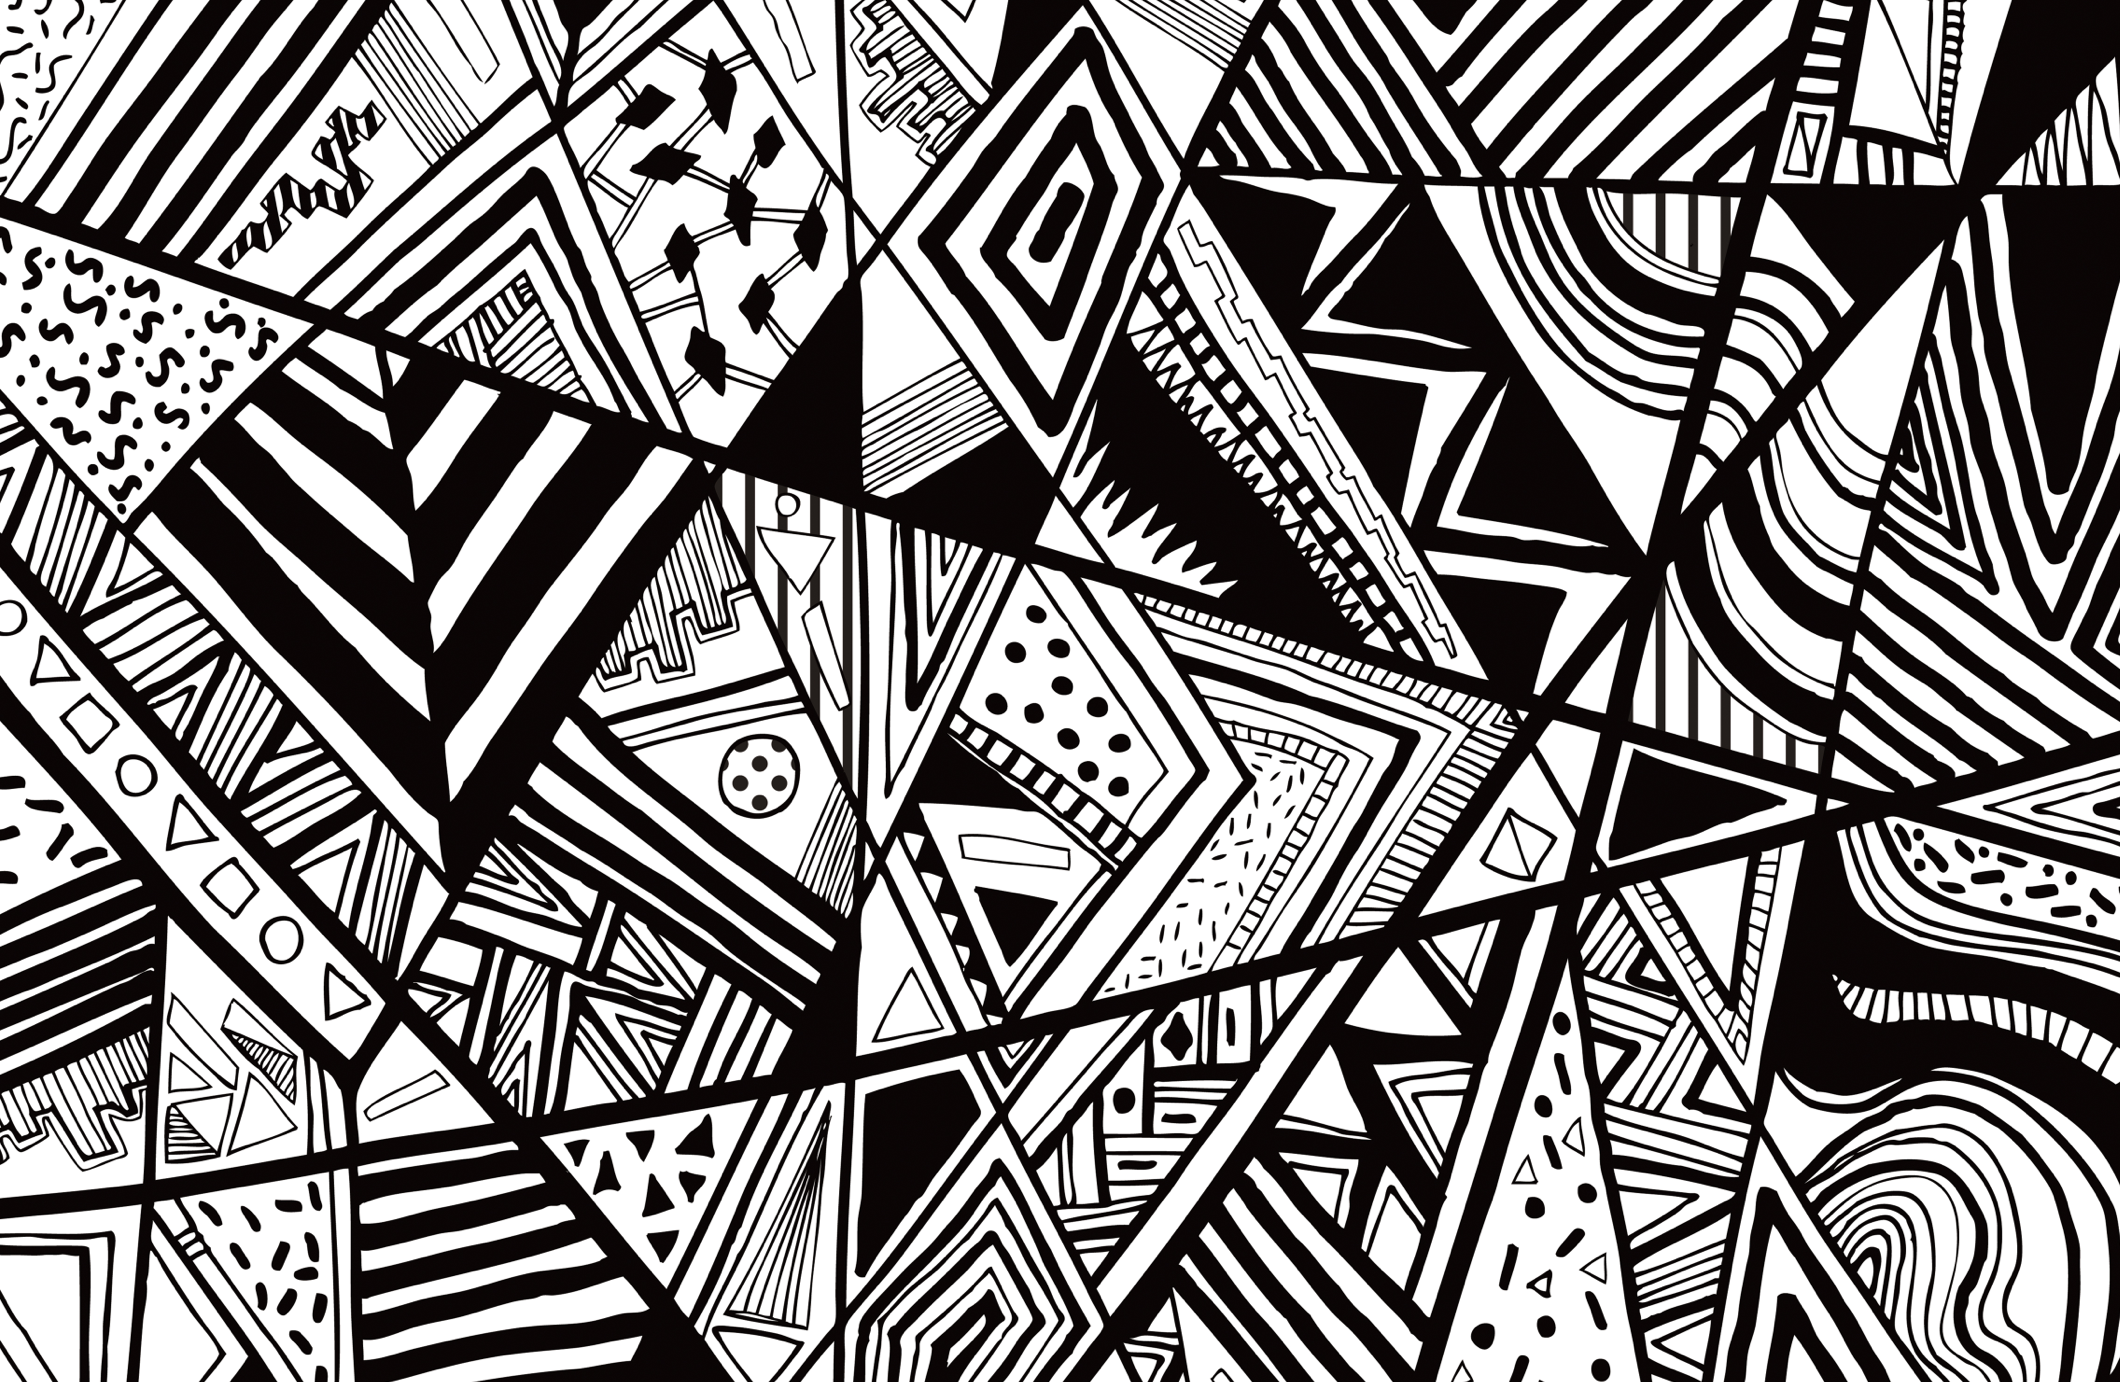 Black and White Abstract Line Patterns